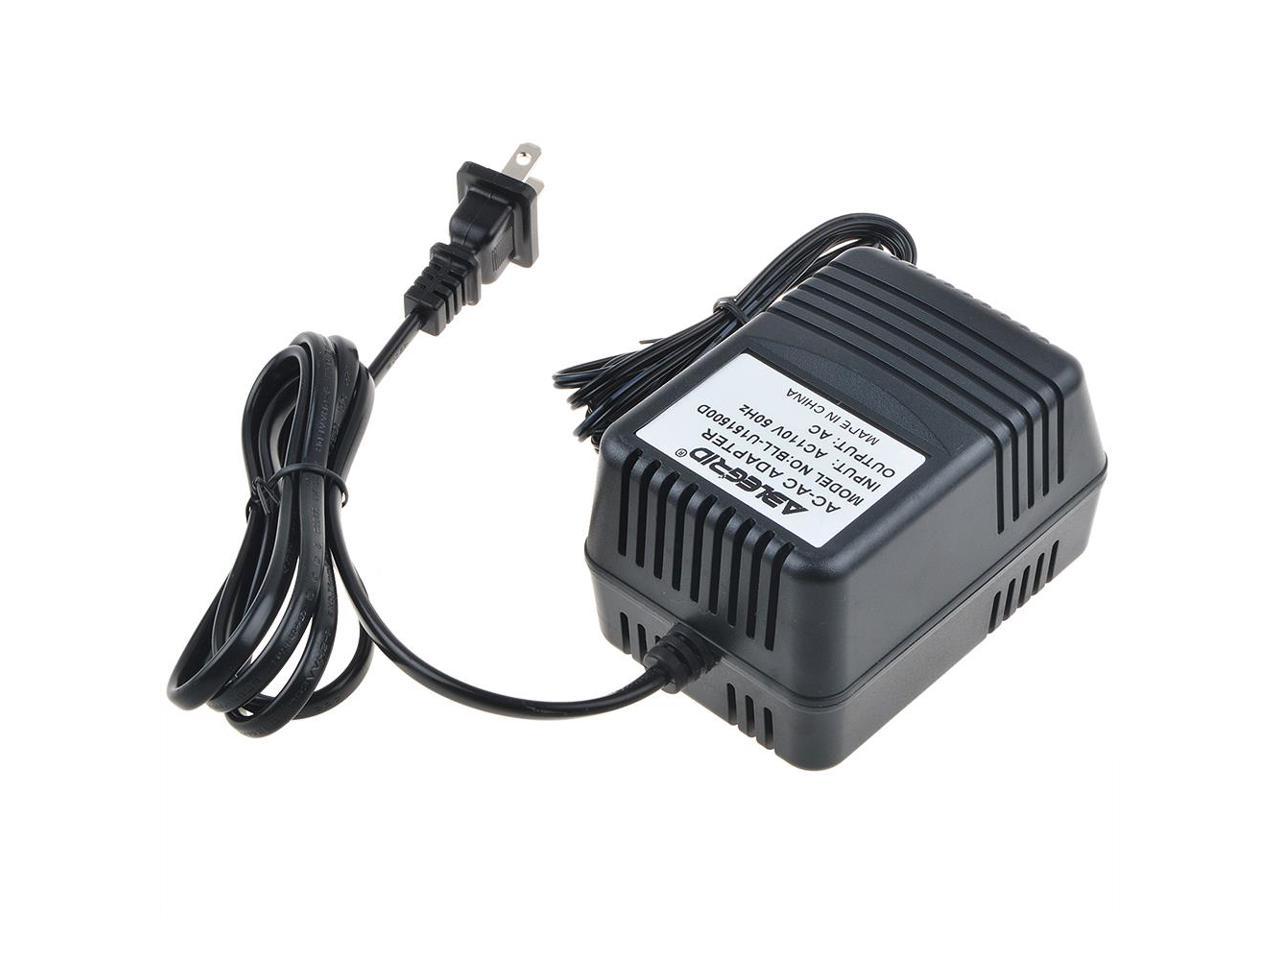 10V AC Adapter For Panasonic SC-EN5 SC-EN53 AM/FM Stereo Compact System Charger 